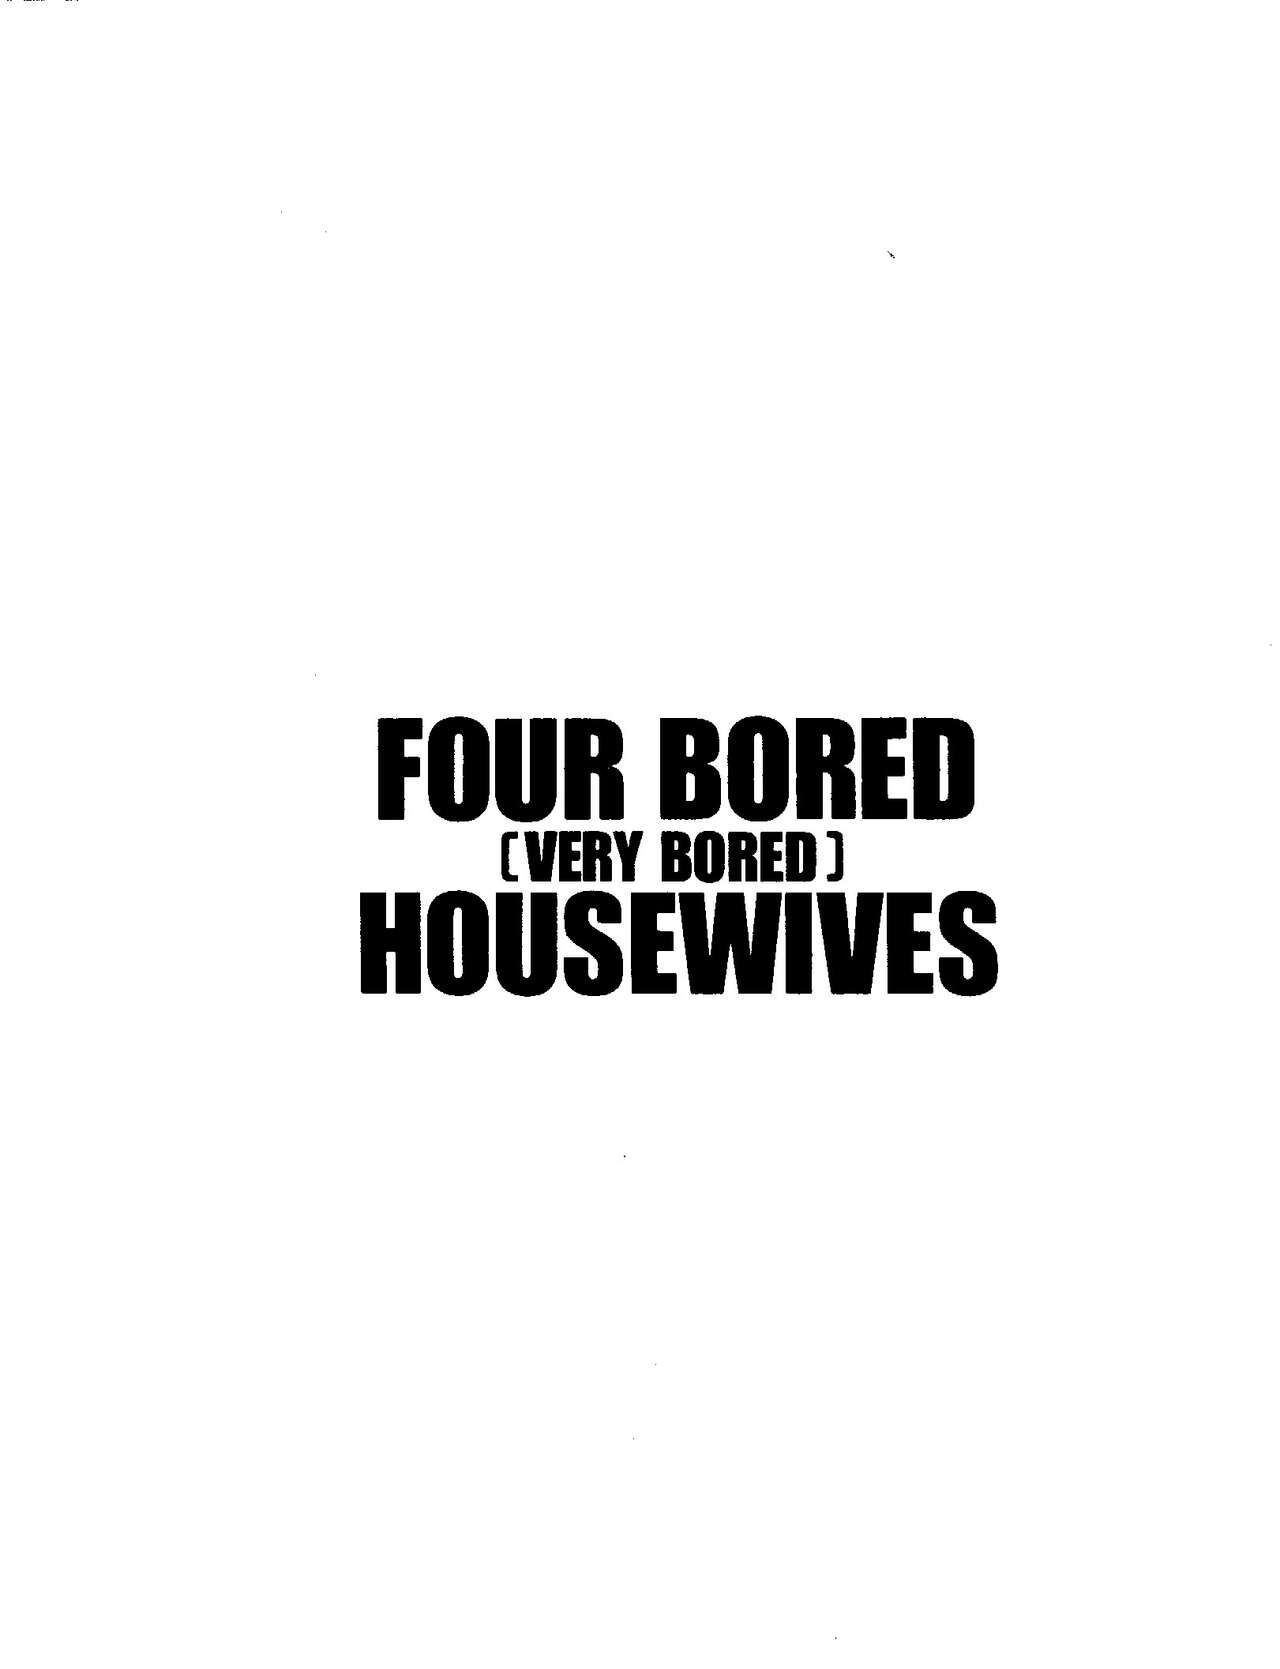 Four Bored Very Bored HouseWives (Art Hurric / Von Thrubble) 1